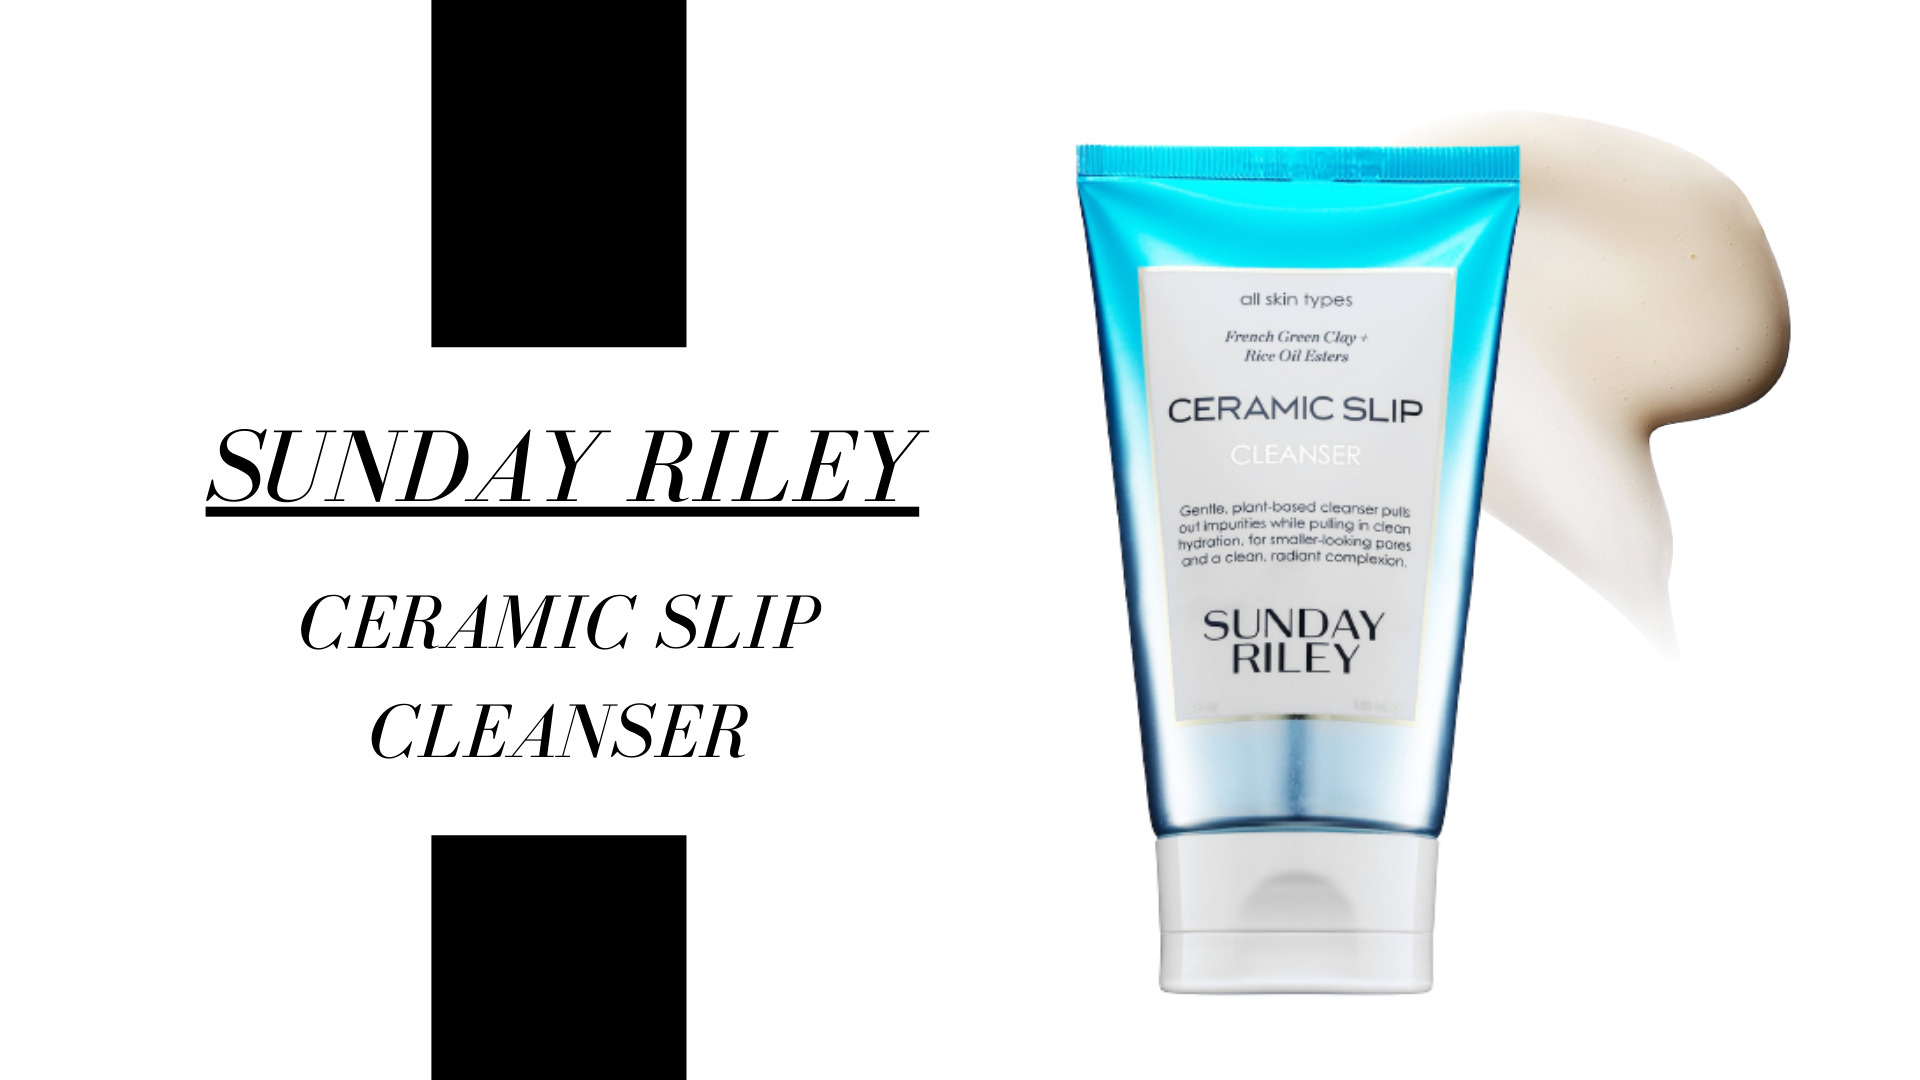 Last but not least, we had to include this amazing Sunday Riley cleanser. It works fantastic with normal, oily, combination, and dry skin. This foaming gel cleanser pulls out impurities (while pulling in clean hydration) for smaller-looking pores and baby-soft skin. Made with plant-based soaps that naturally purify skin and remove makeup. This product not only will clean effectively your skin but will also balance even the most sensitive skin!  Amazing right? Another great aspect of this product is that it is oil-free, silicone-free, and fragrance-free. Plus, it is vegan and cruelty-free.